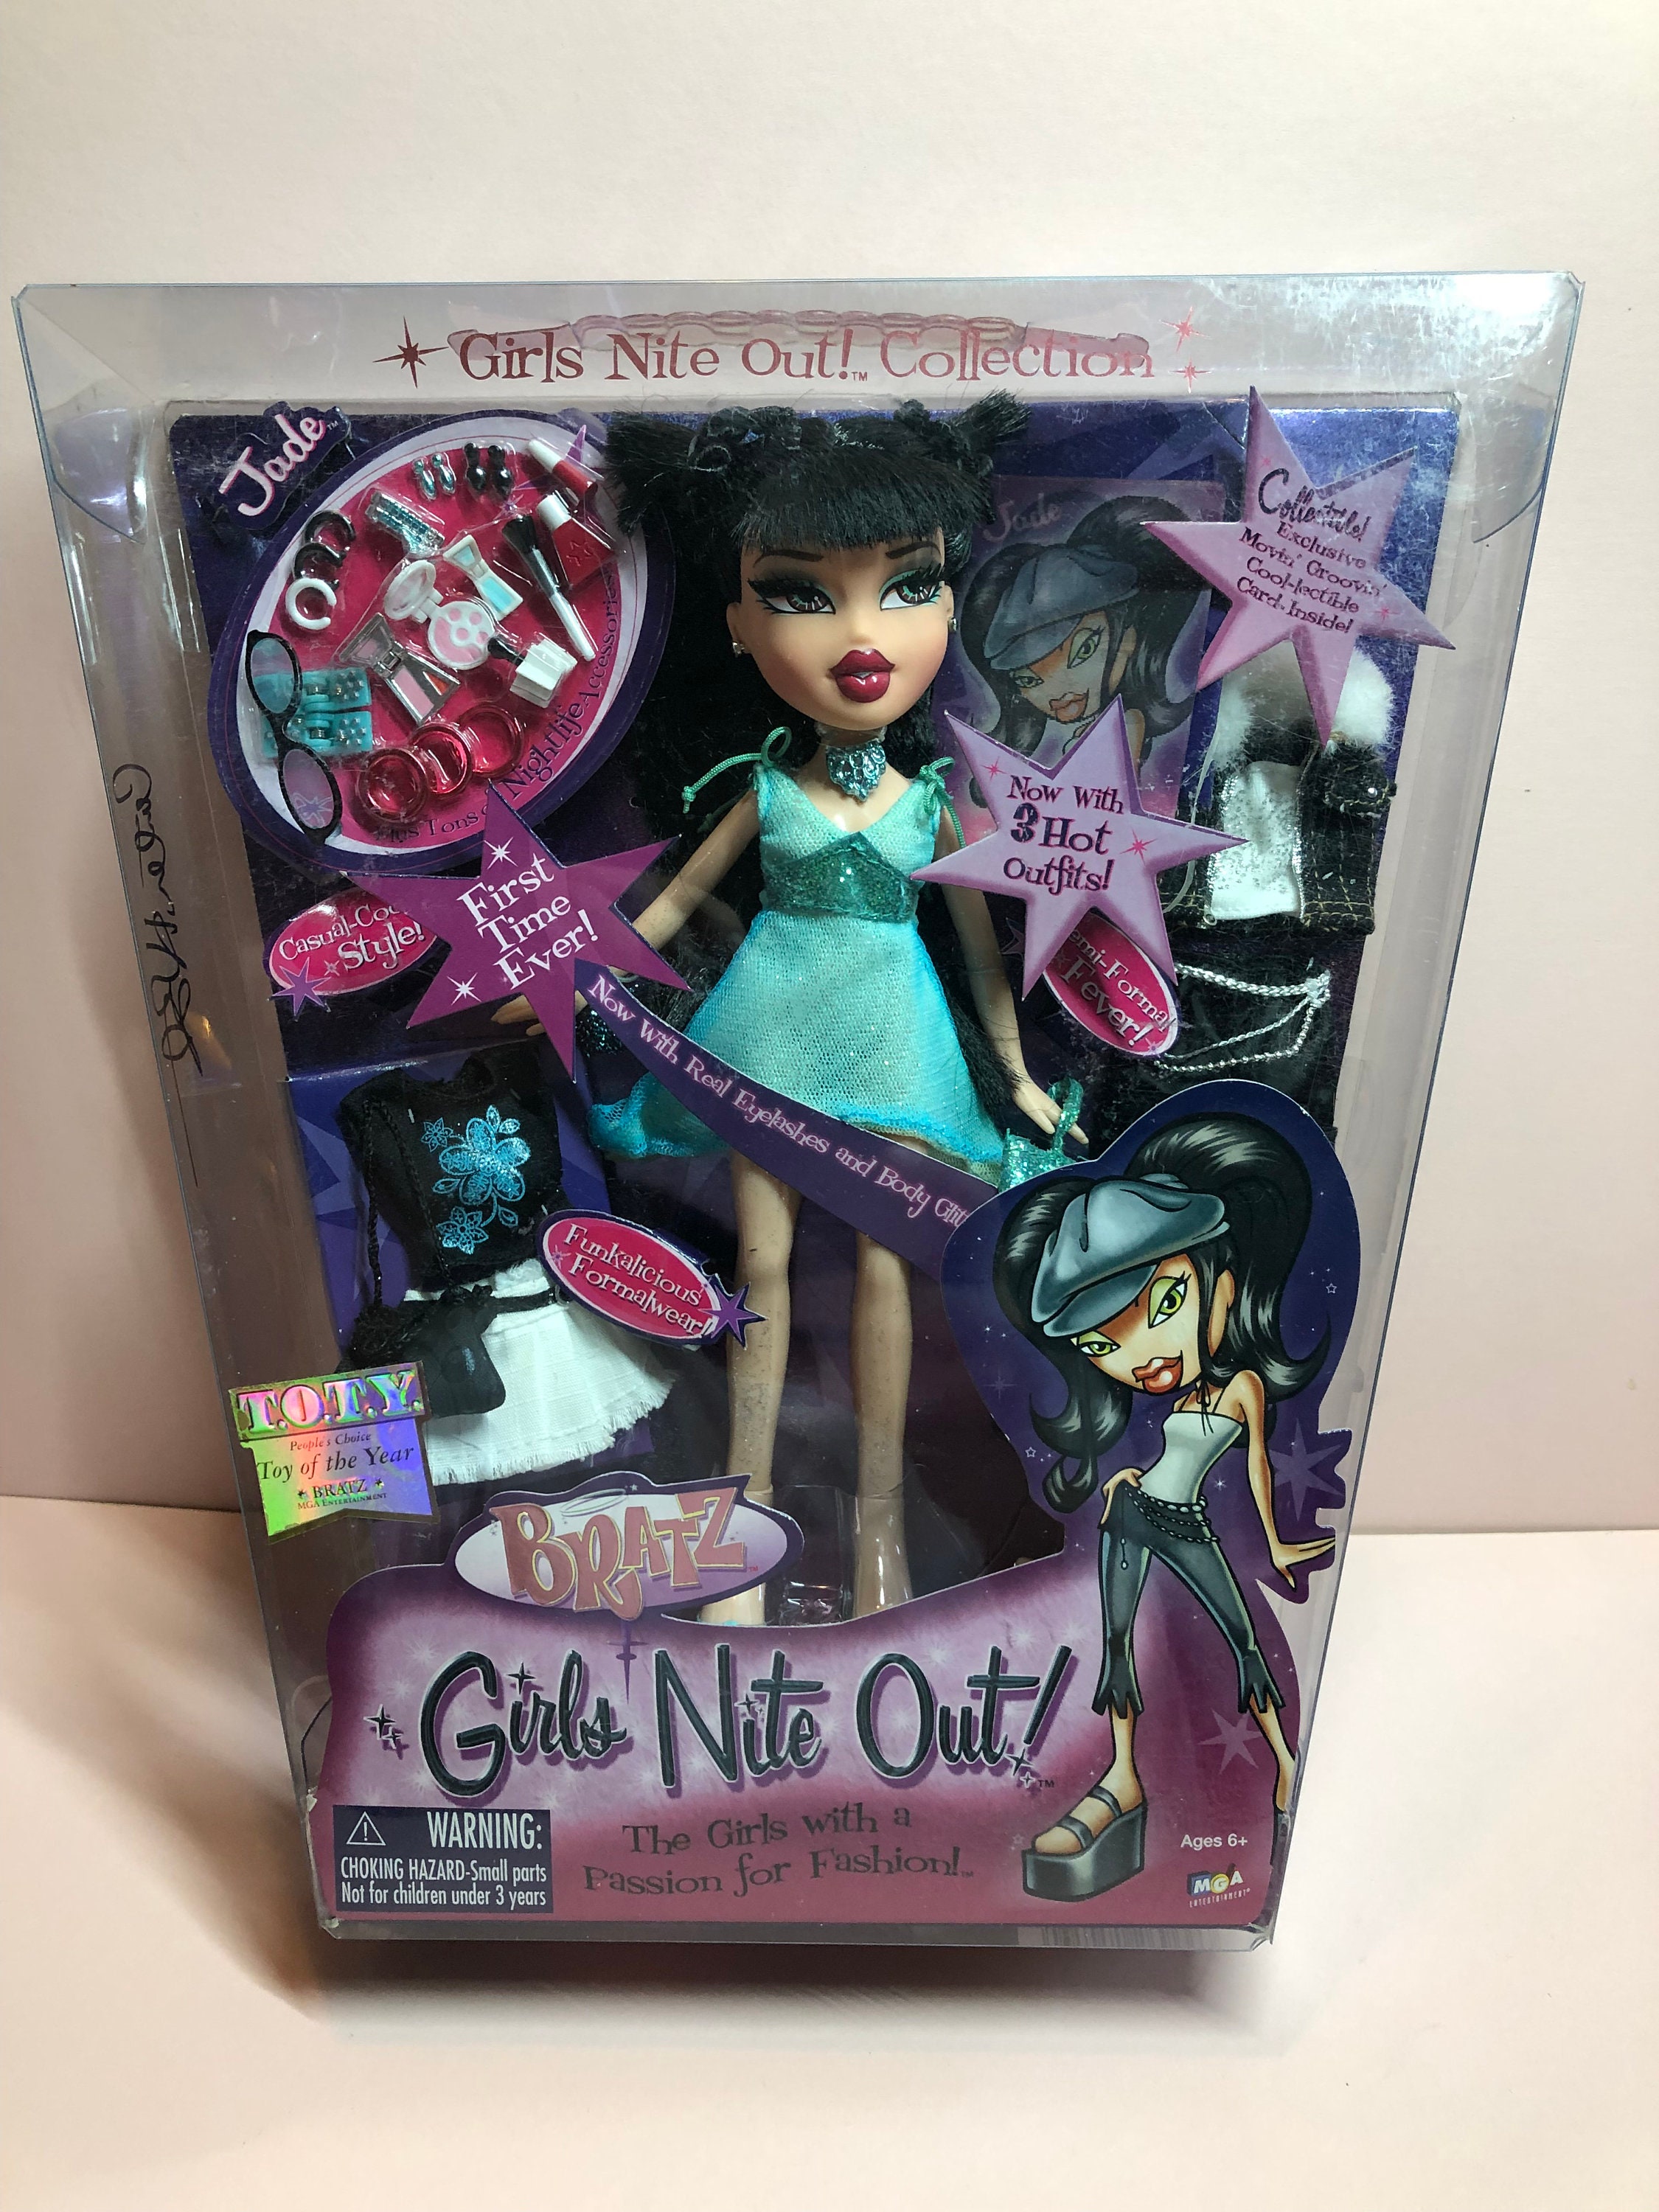 Bratz Girls Night Out Jade! Original Edition. Autographed by Bratz creator  Carter Bryant, from his personal collection.